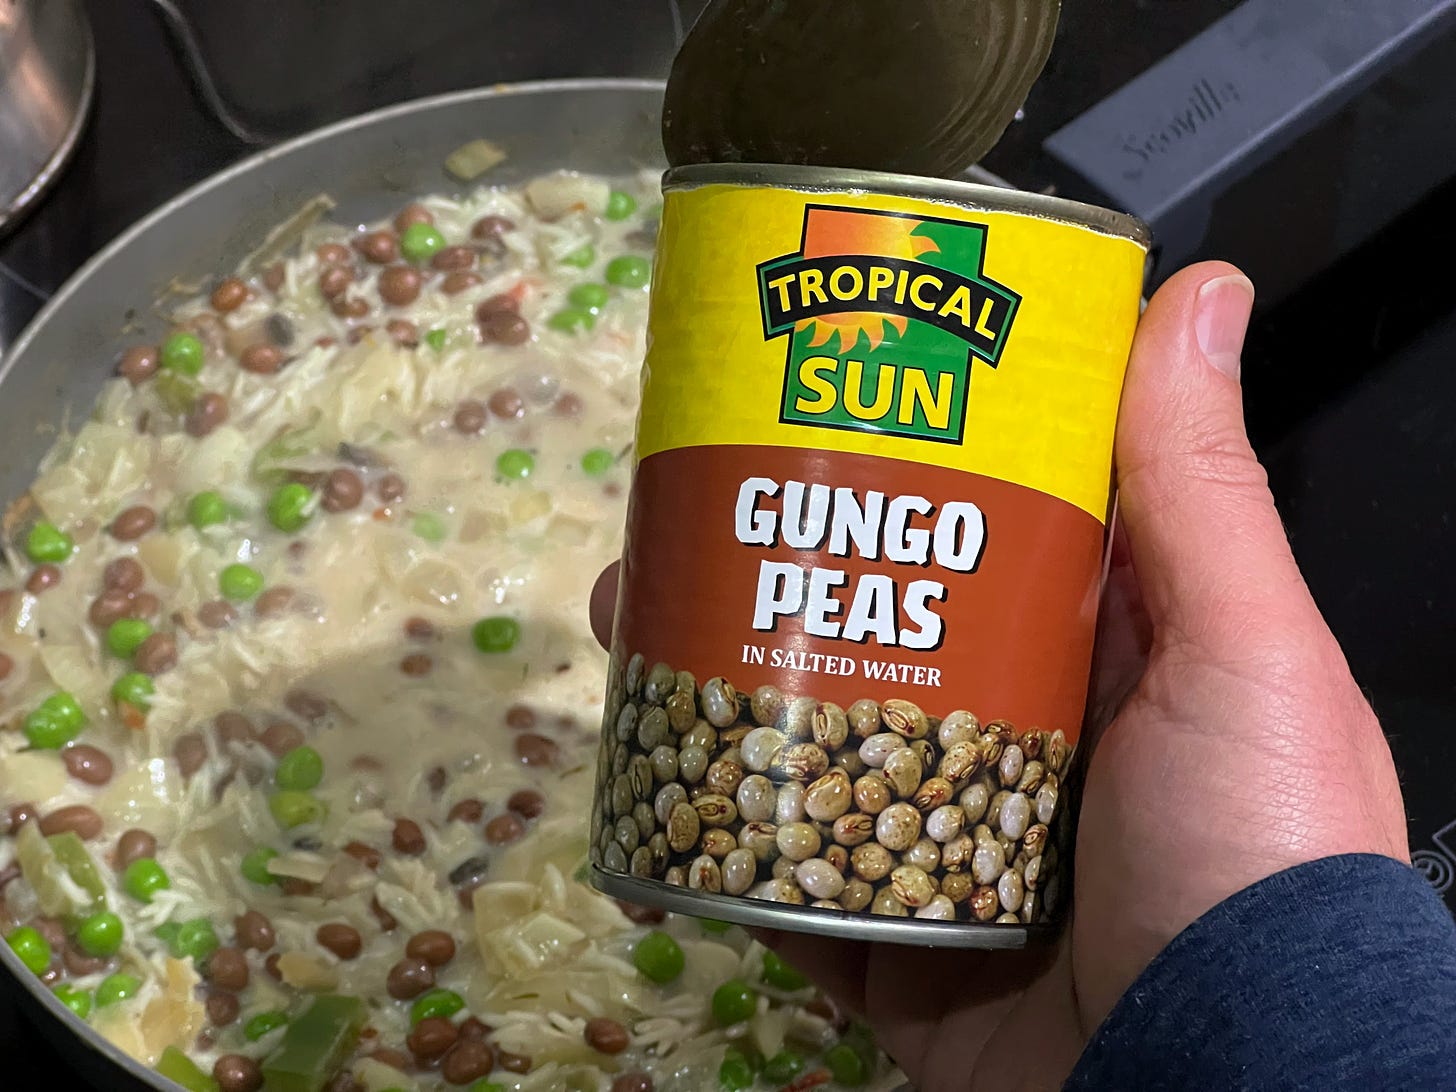 A tin of Gungo peas being held over a simmering pan.